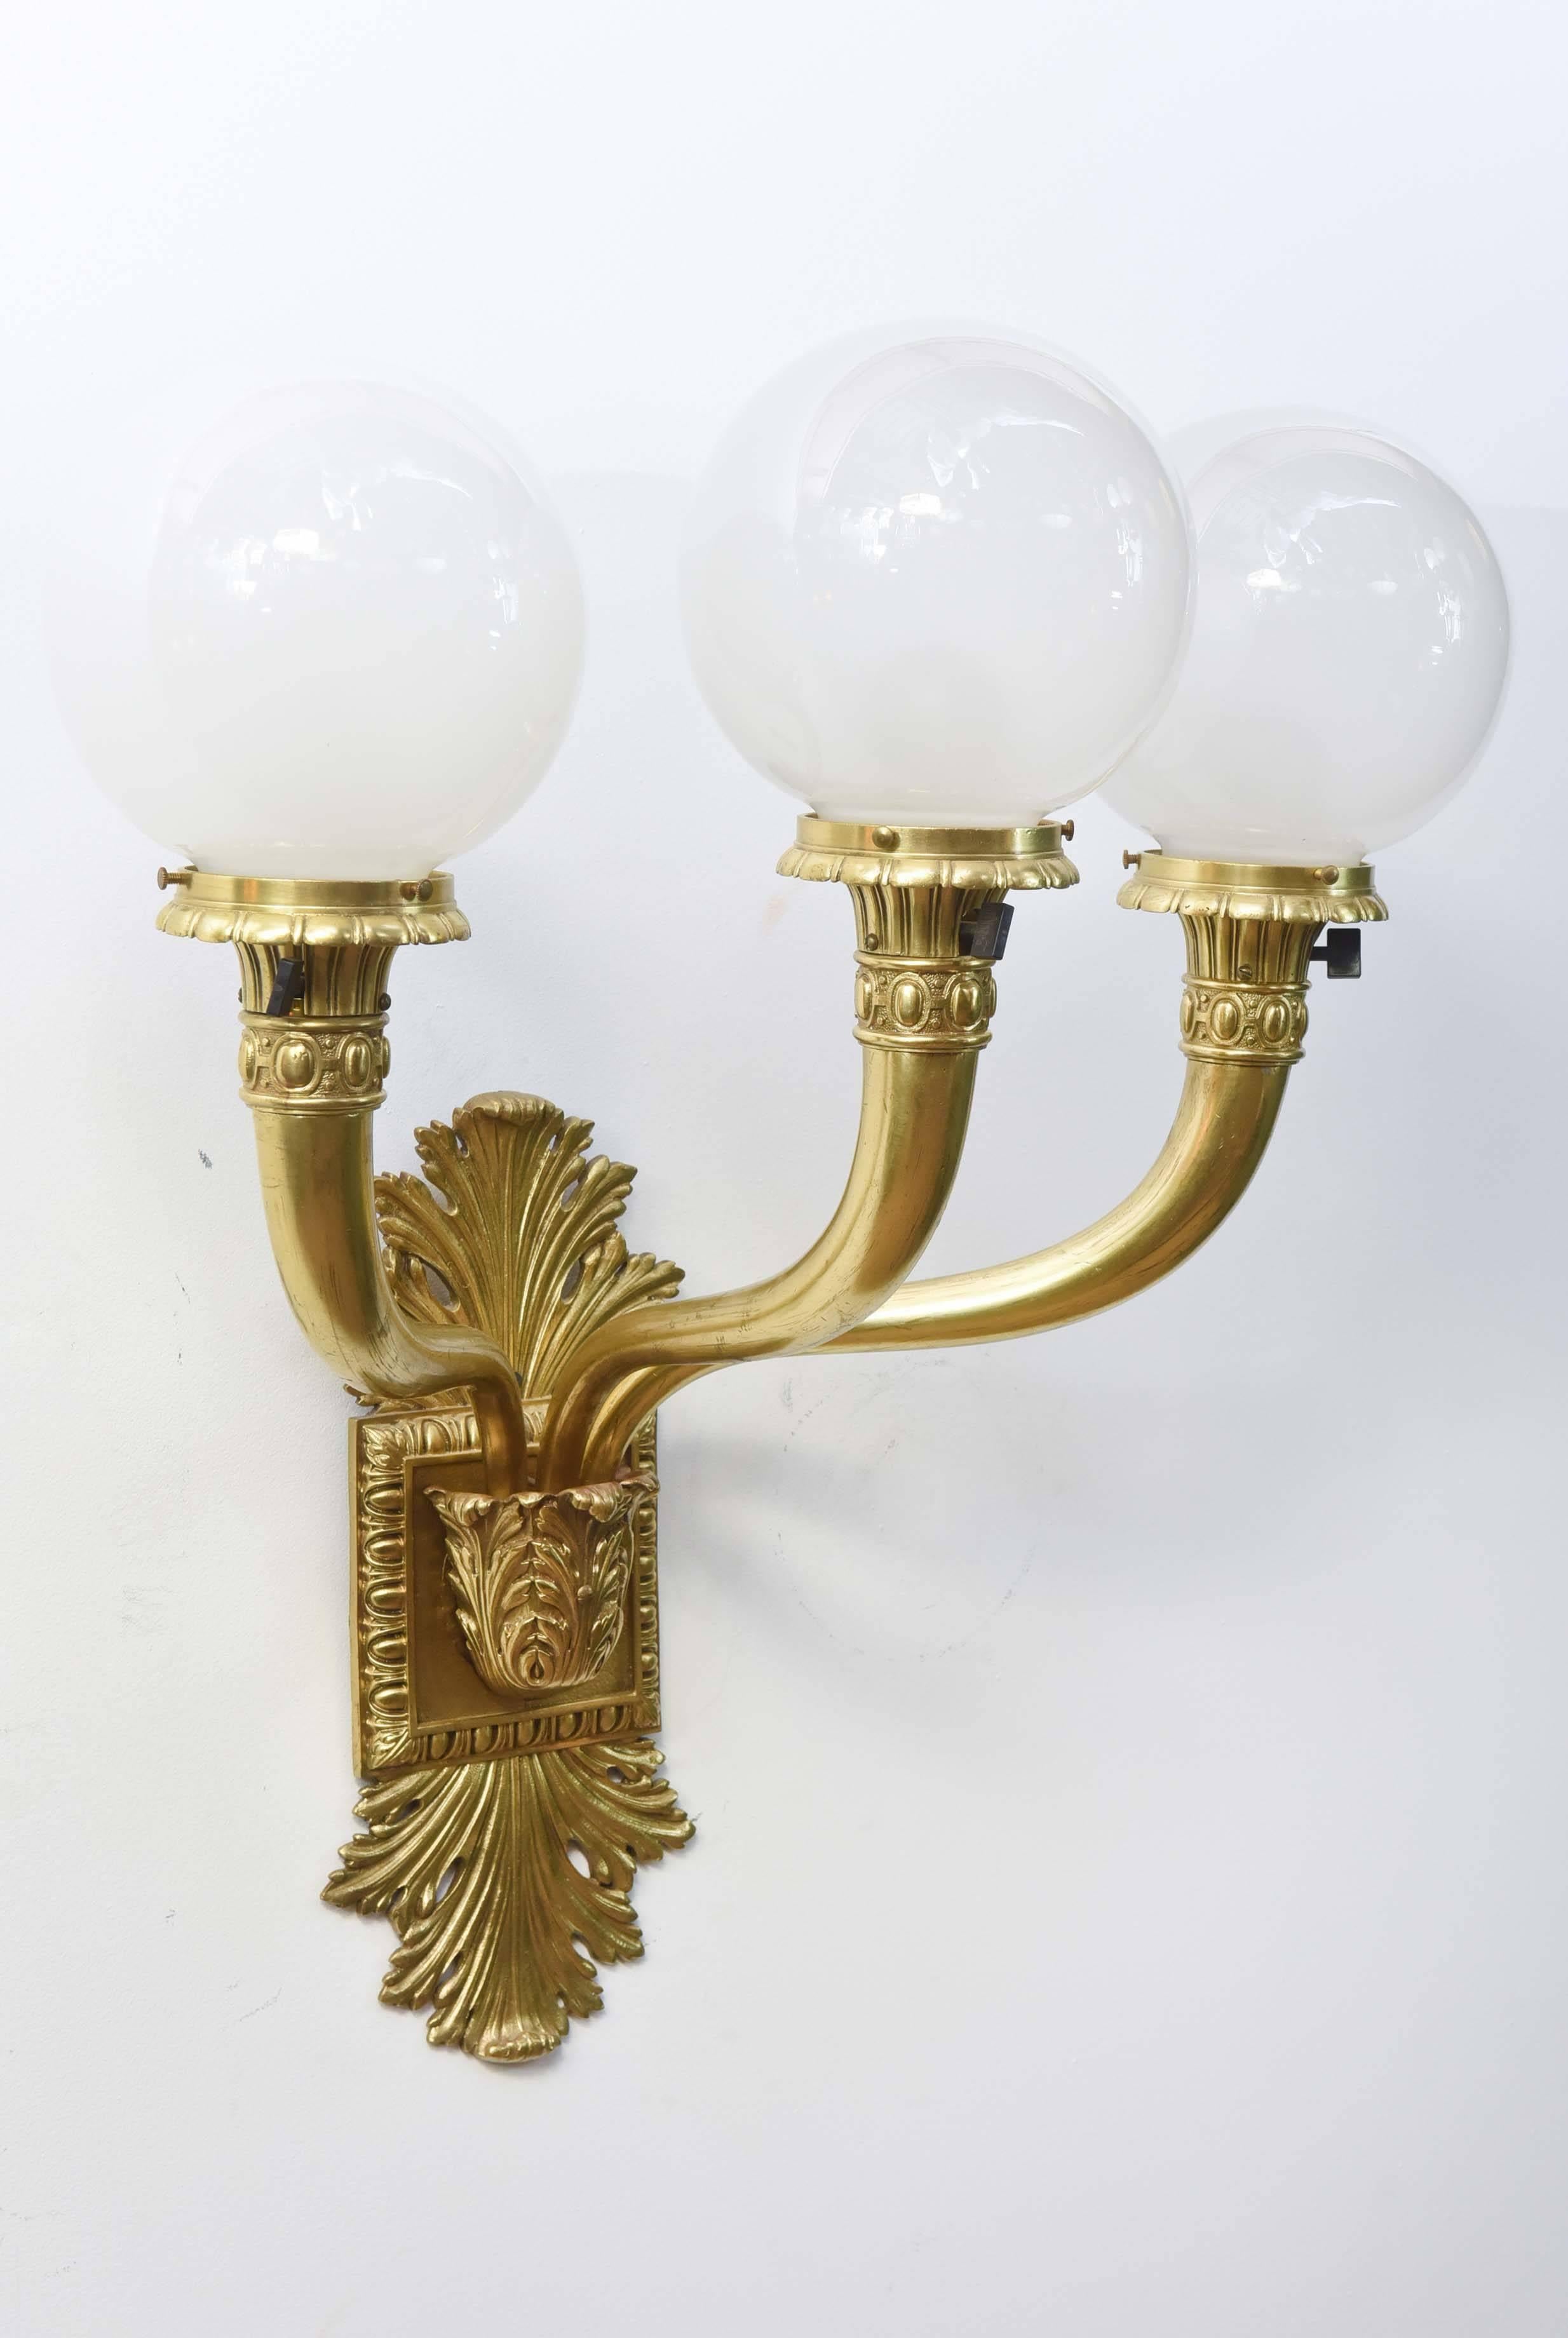 Cast brass large sconces, early electric, restored and rewired. The backplate is adorned with acanthus leaves with three arms.